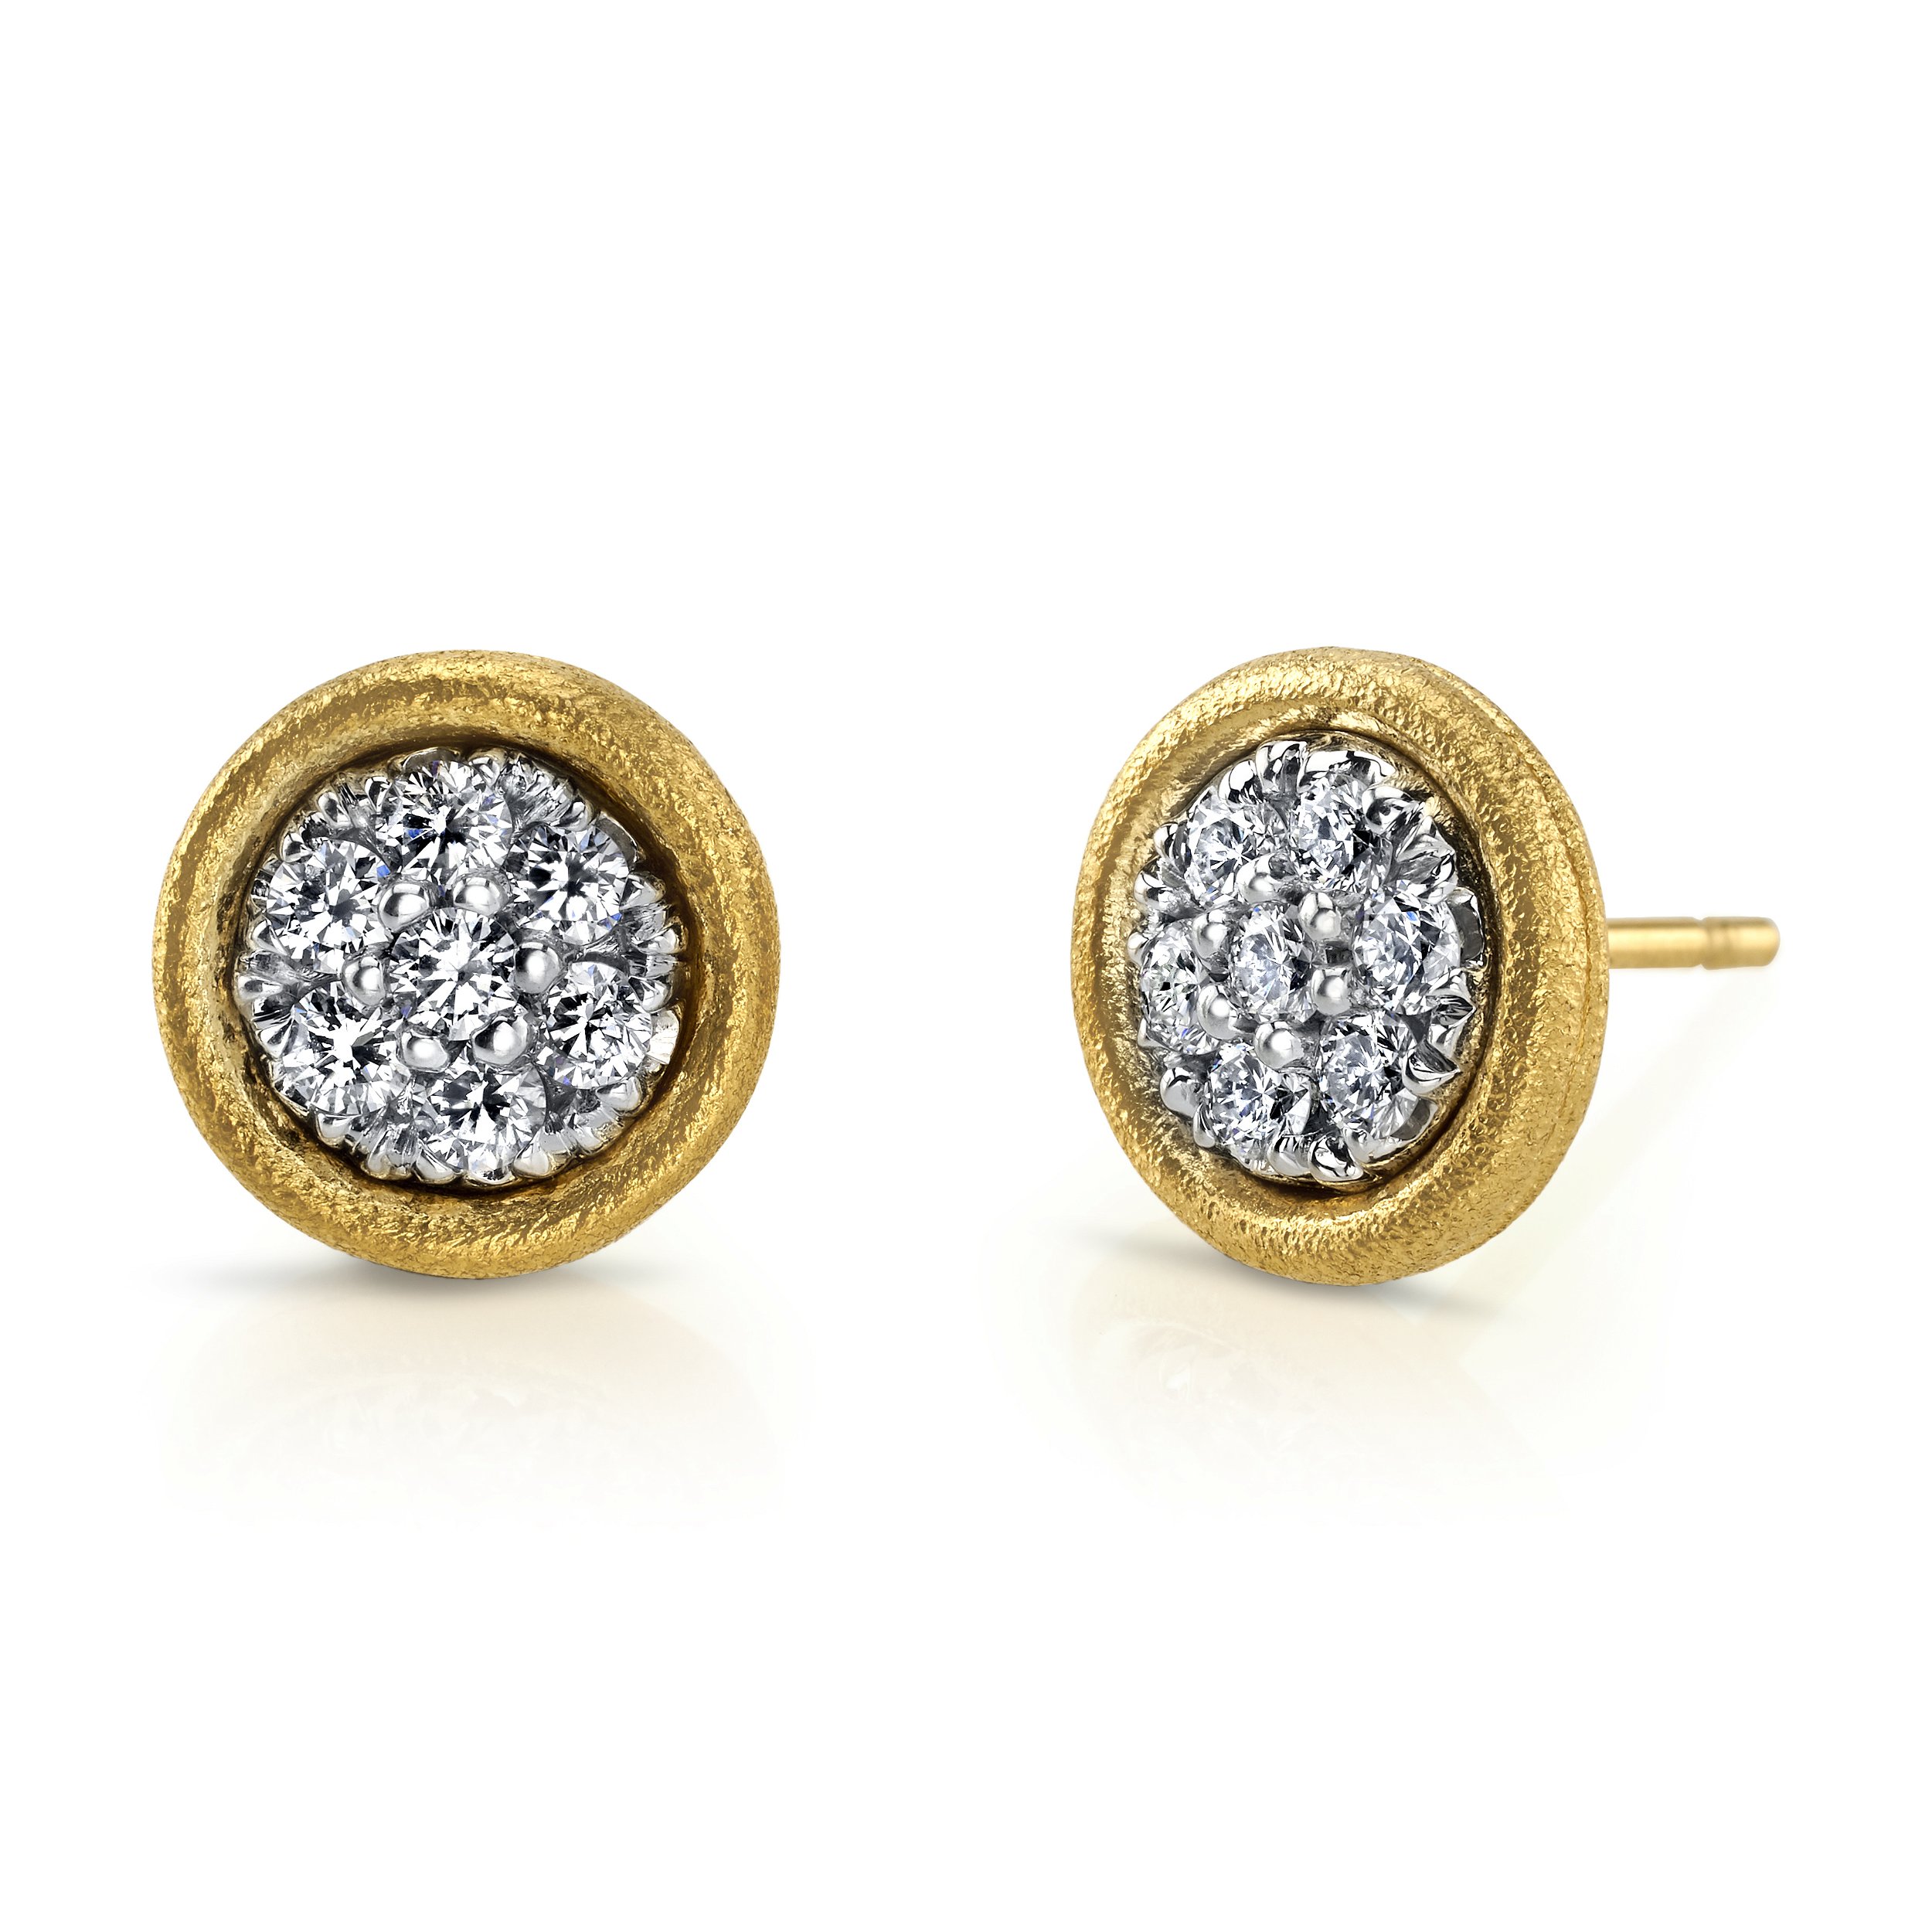 Mosaic Stud Earrings with Diamond Centers in 18kt Yellow Gold